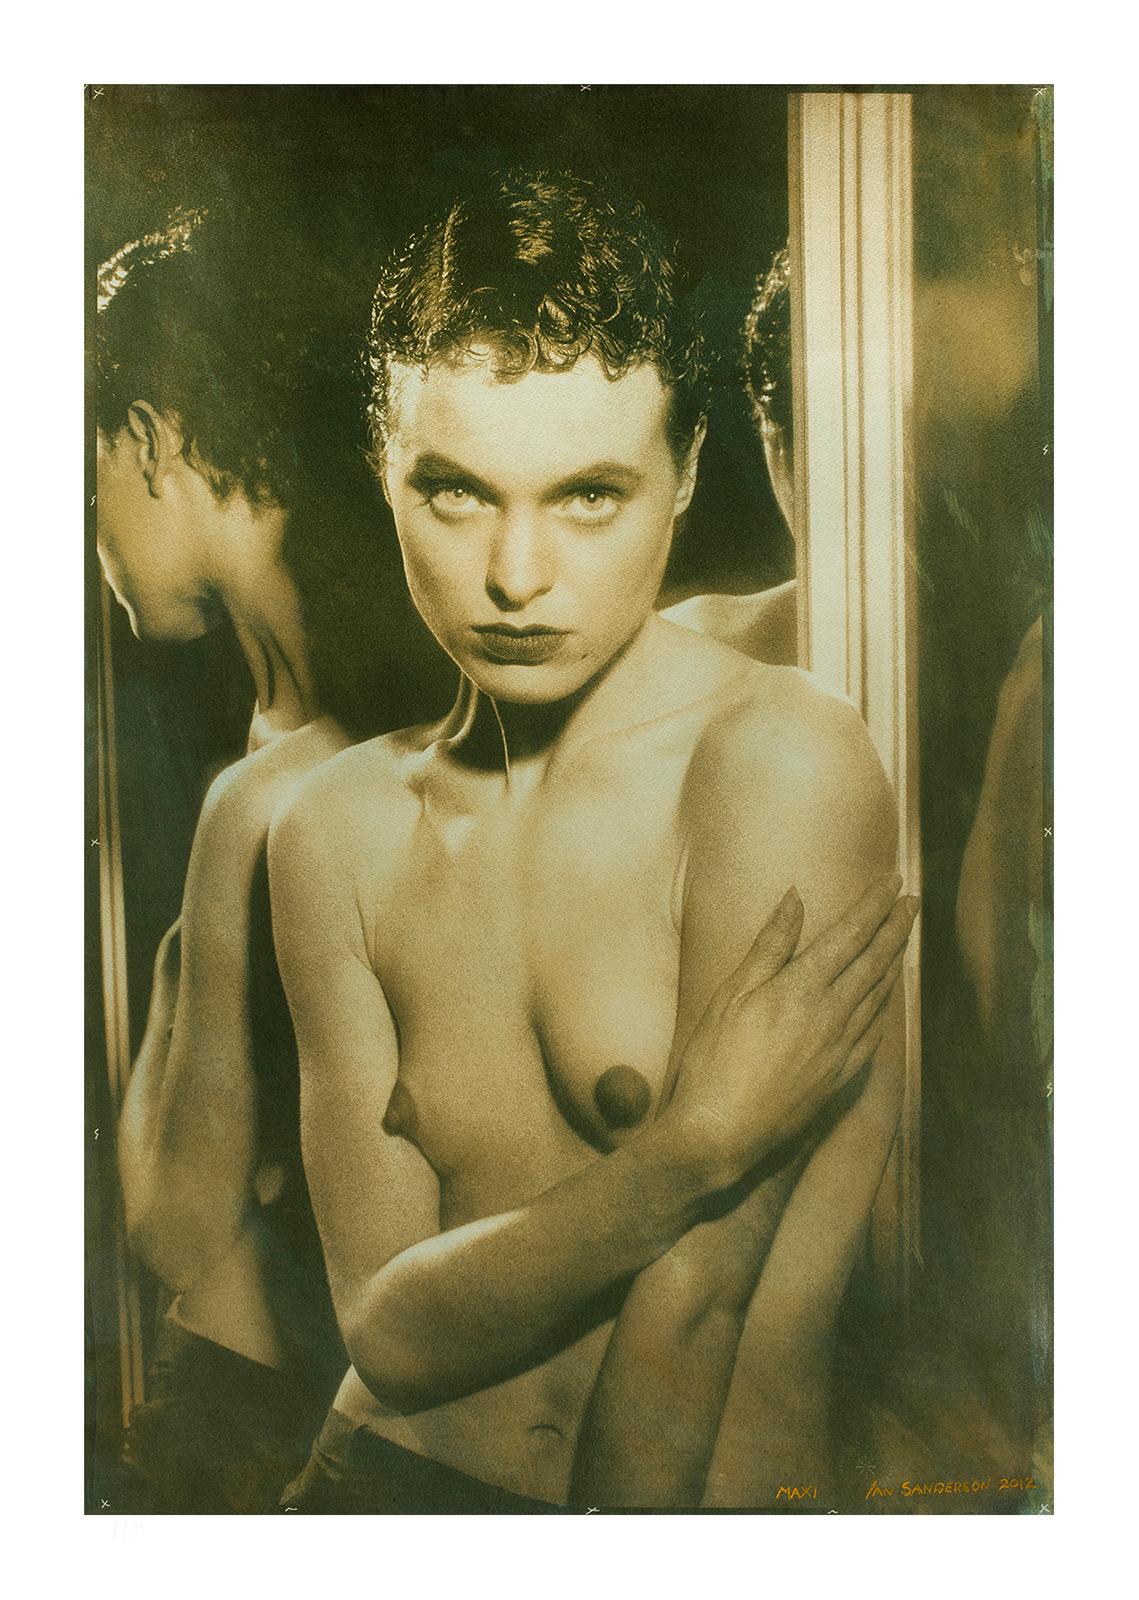 Maxi - Signed limited edition archival pigment print on an textured art paper -   Edition of 8  
Photography : 1988
Bichromate print : 2012

Will be part of Ian Sanderson's future Brighton 1980s retrospective exhibition

This image was captured on